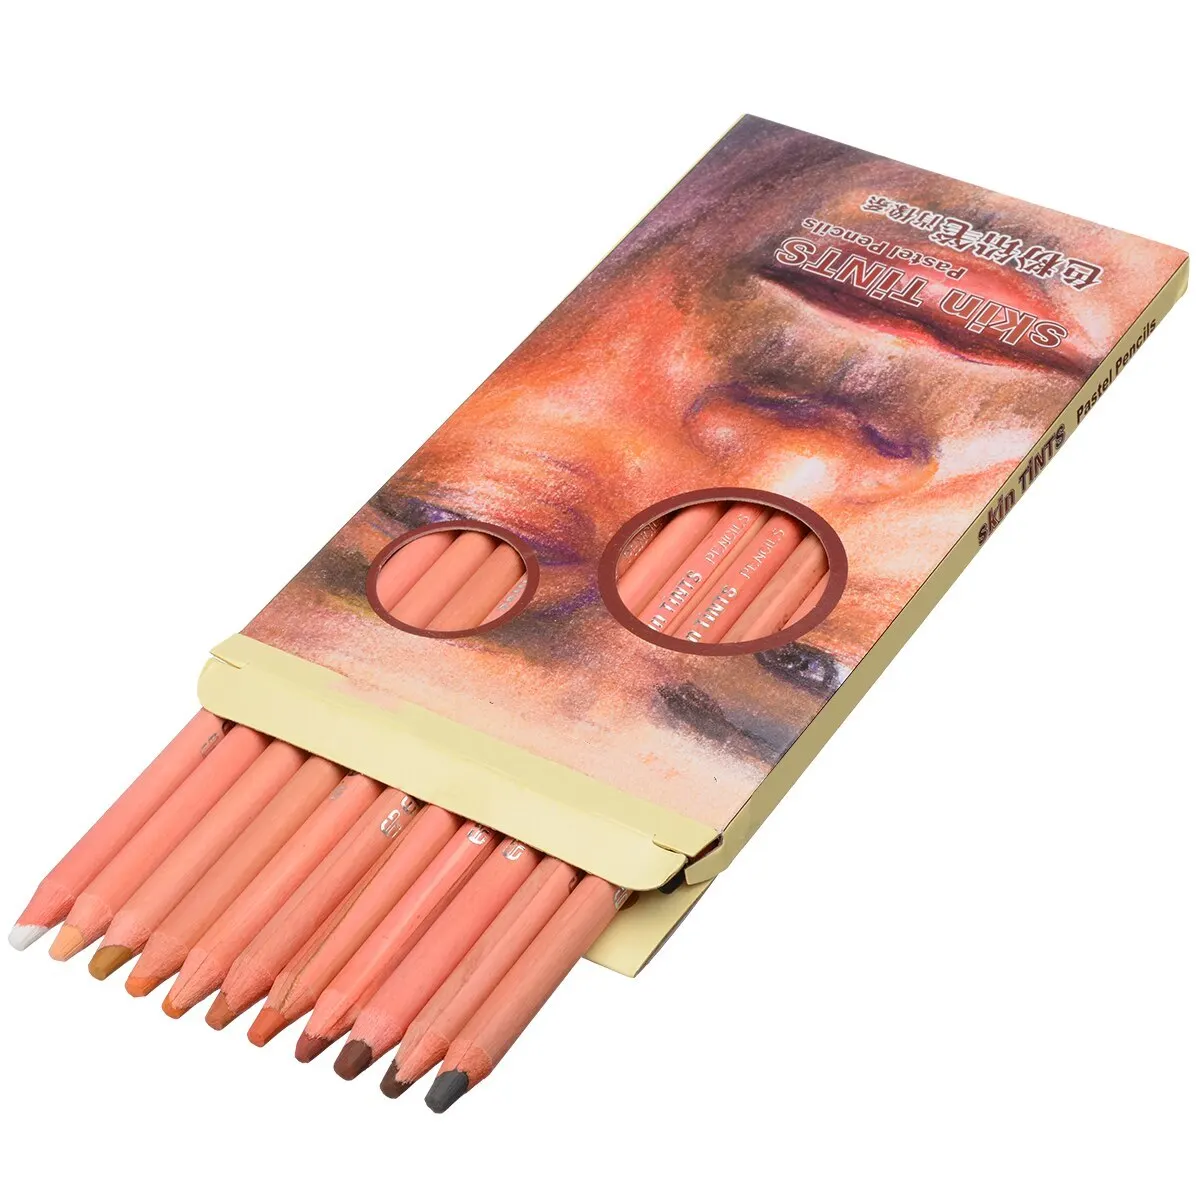 12pcs/set New 17.5cm Wooden Colored Pencils Portrait Drawing Skin Tints Soft Pastel Colored Pencils for Home School Student Use